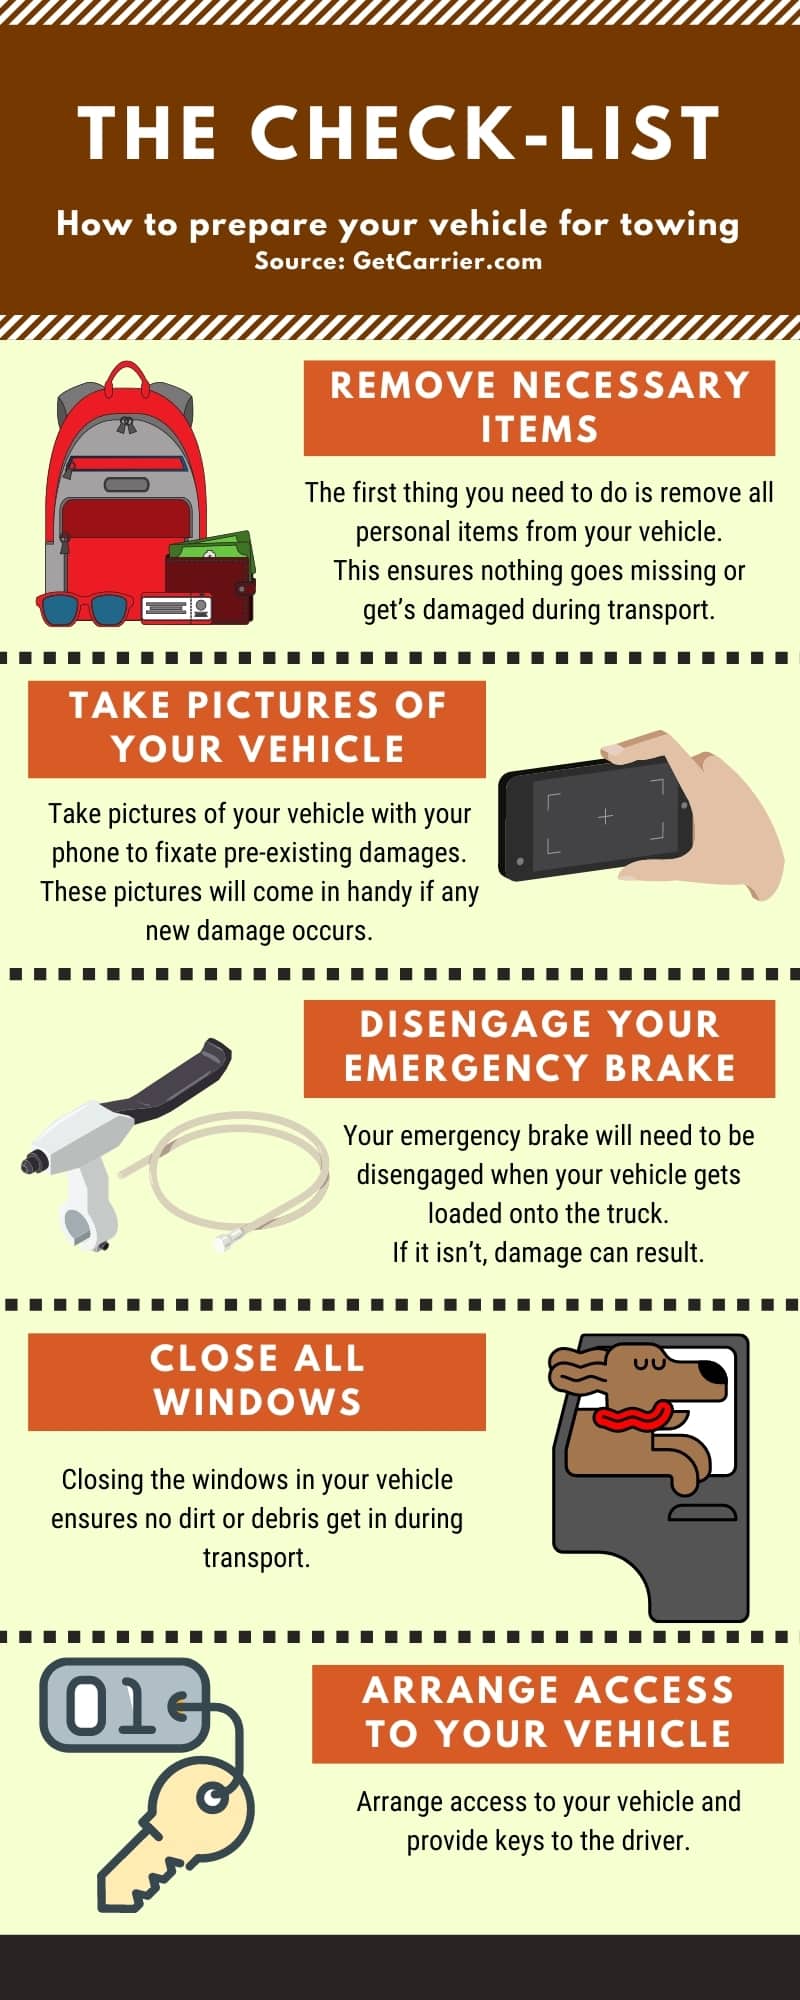 The Check-List | How to prepare your vehicle for towing infographic